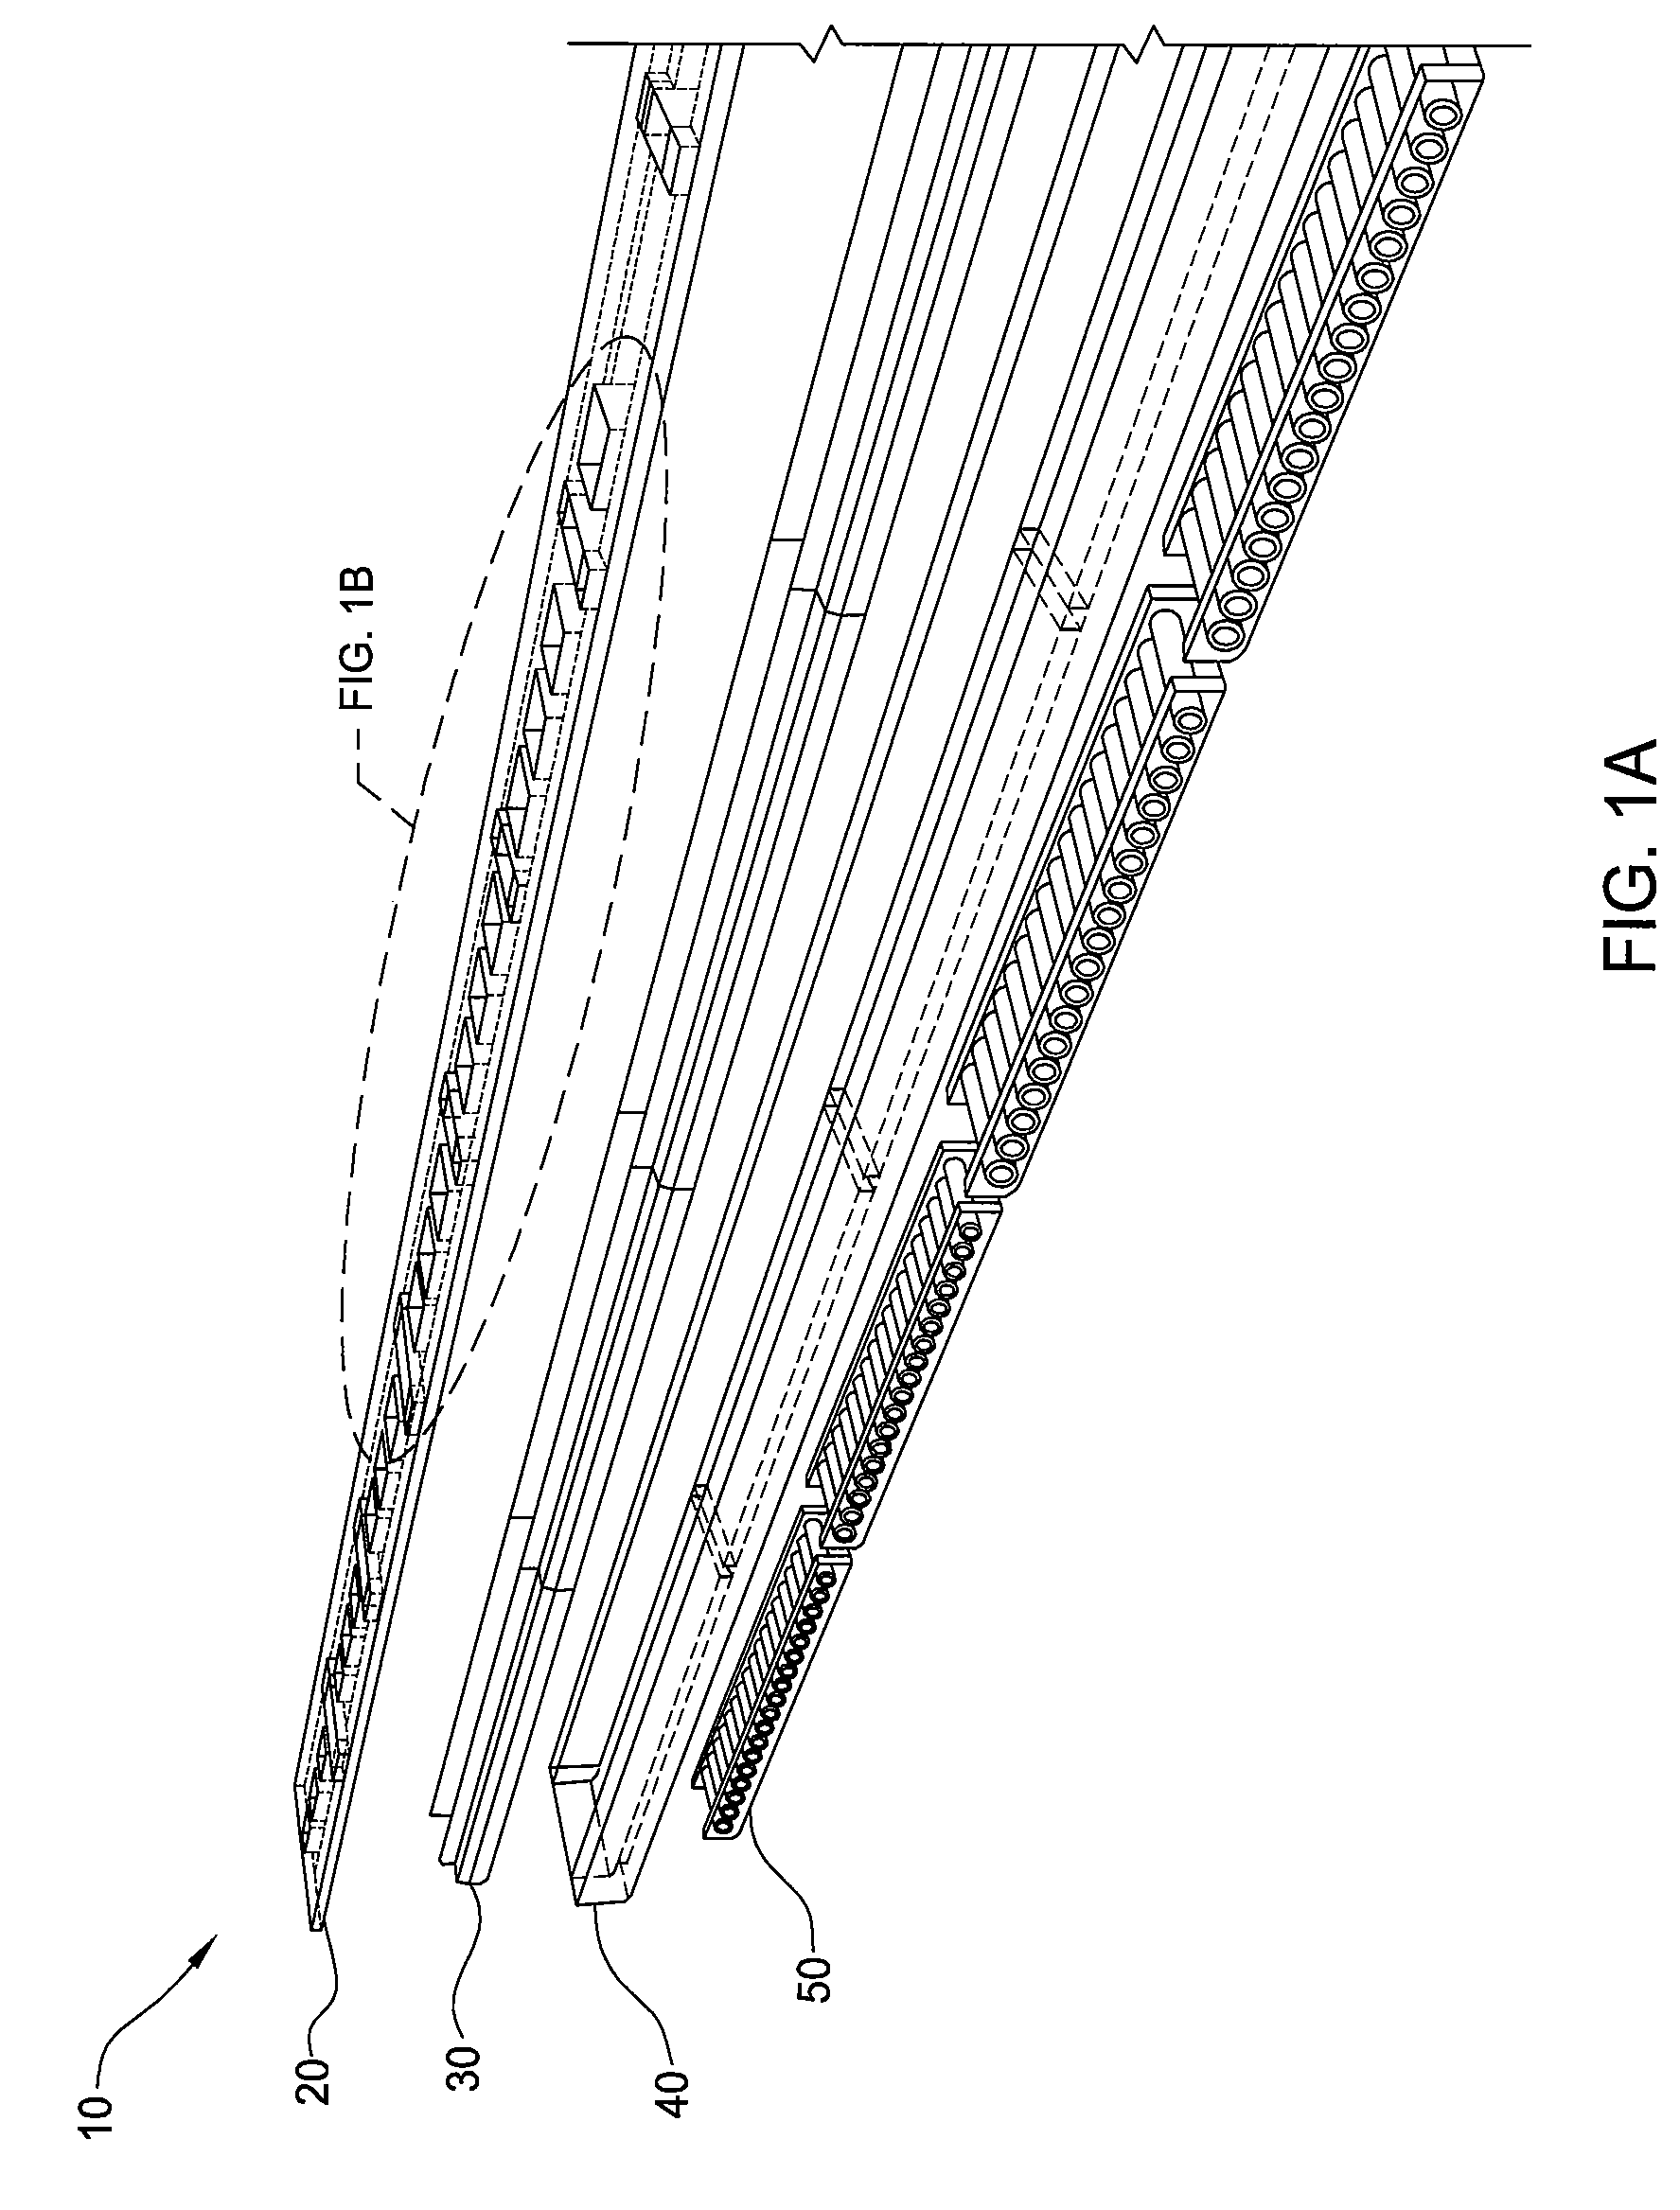 Continuous feed chemical vapor deposition